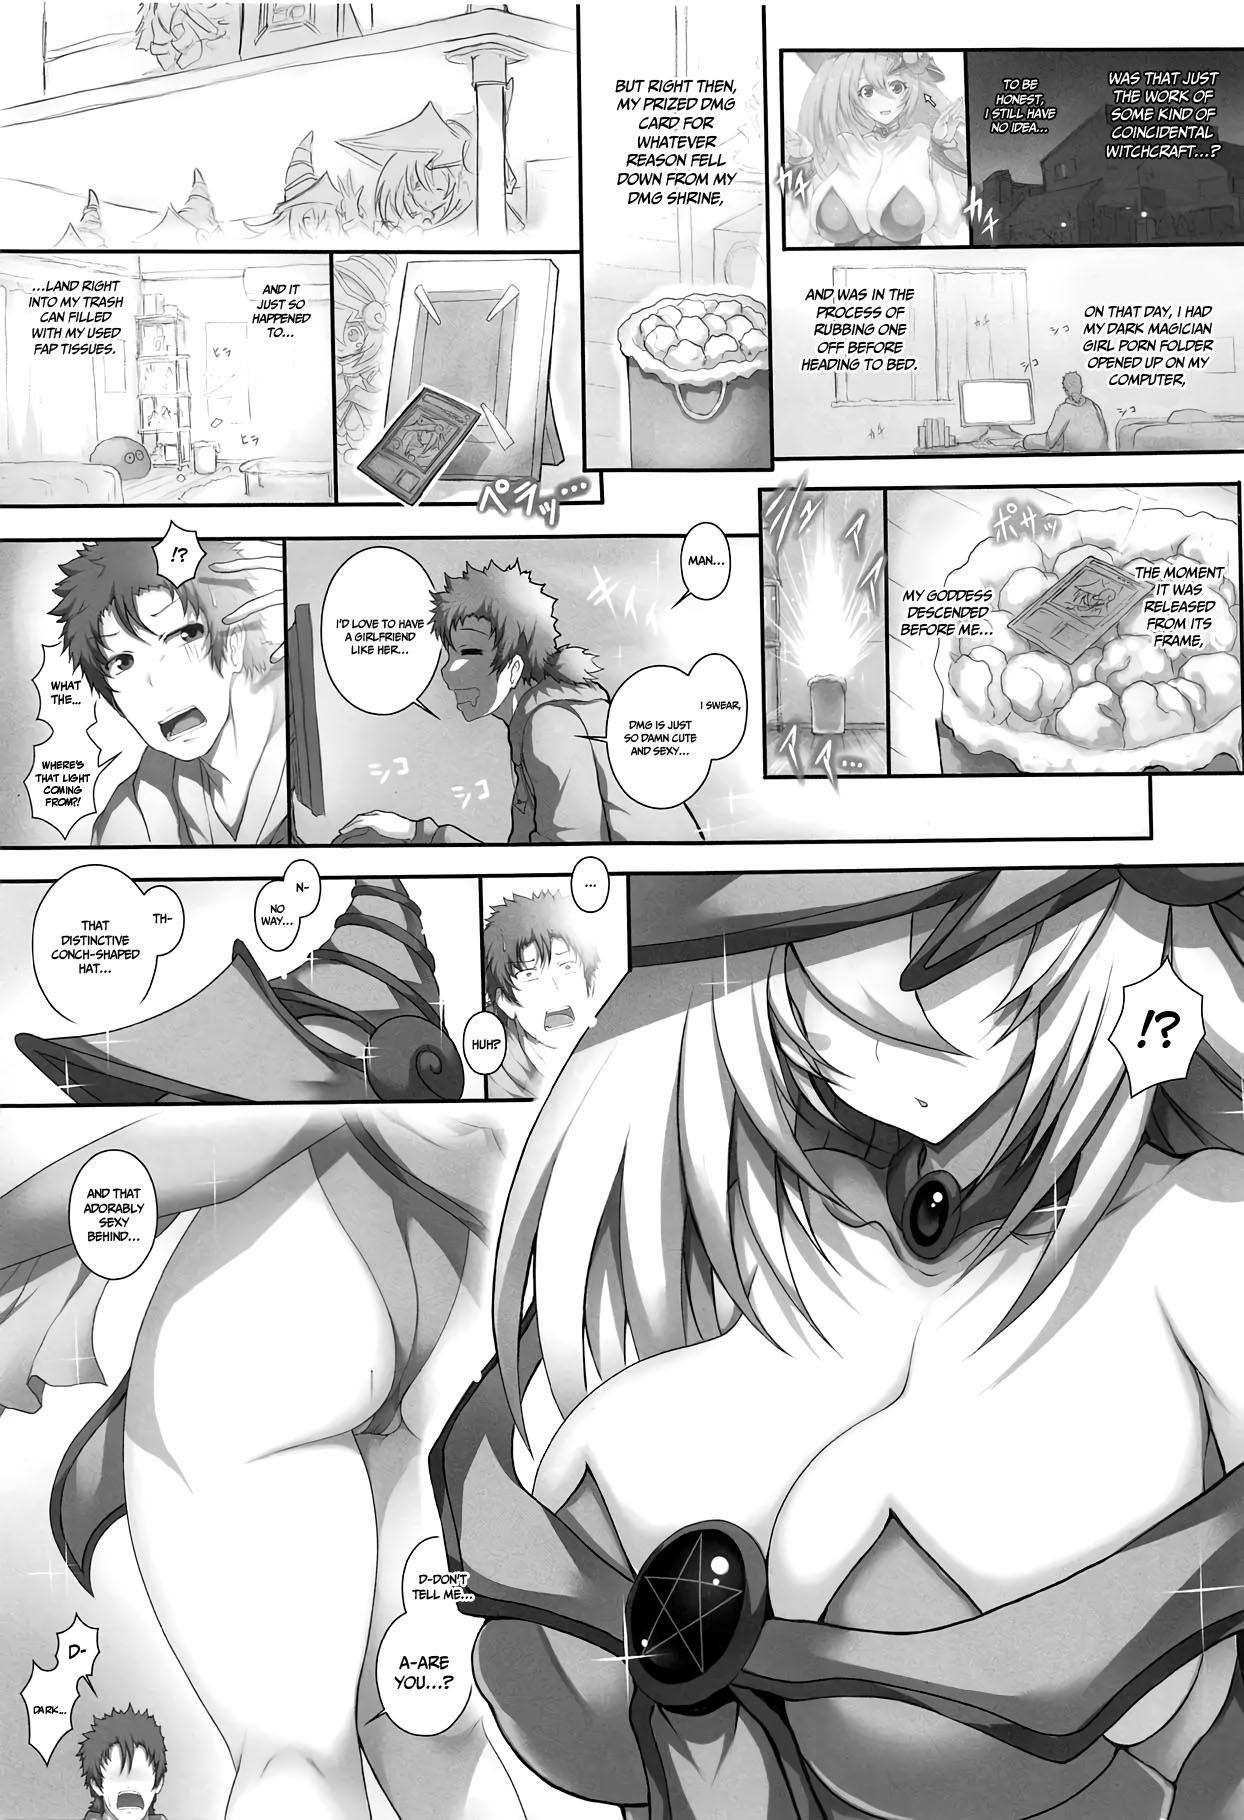 Orgasmus Girl to Issho | Together With Dark Magician Girl - Yu gi oh Grandpa - Page 2